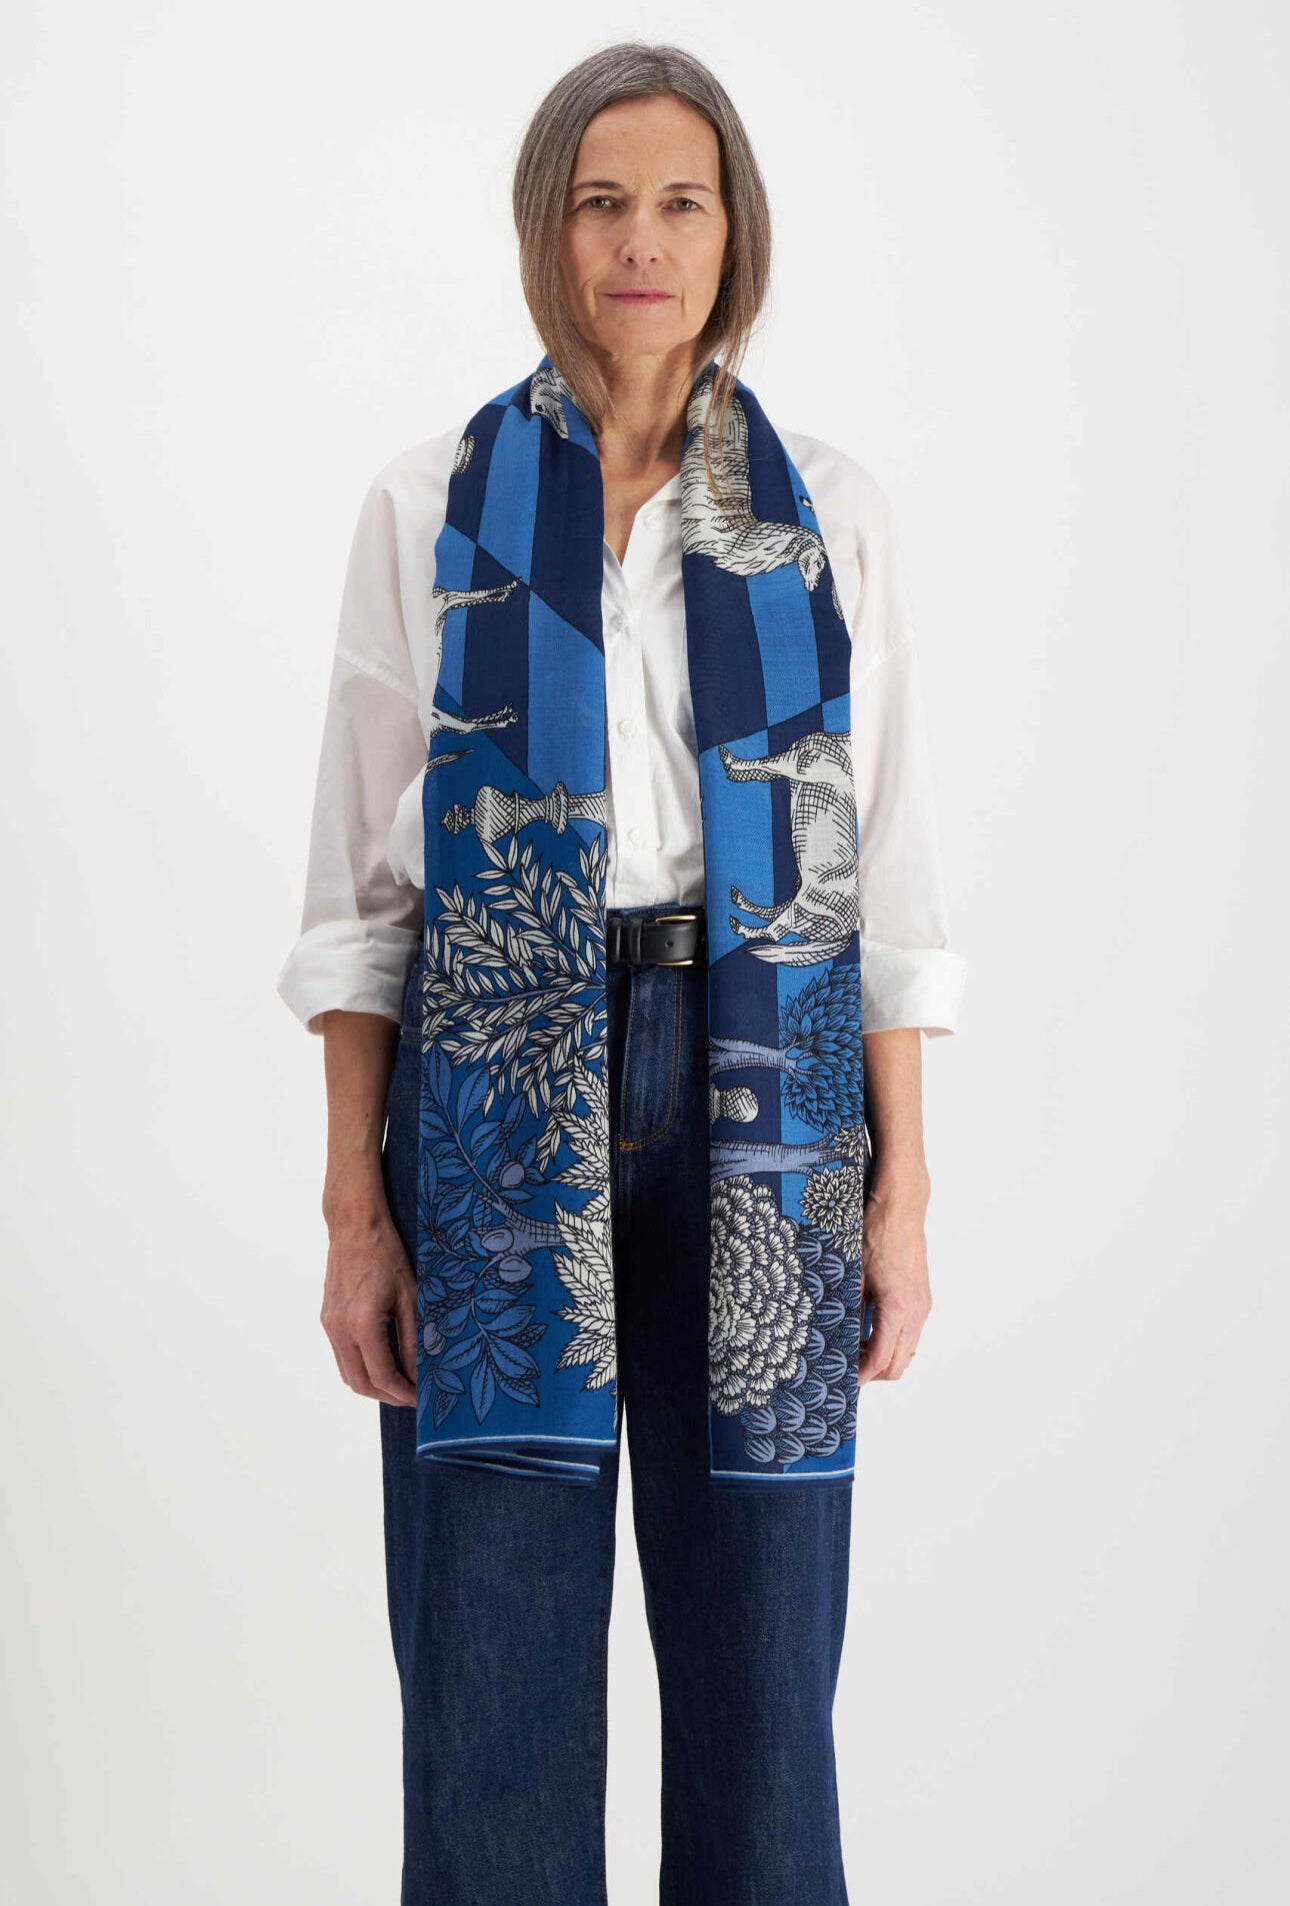 MAGNUS Scarf- BLUE by Inouï Edition